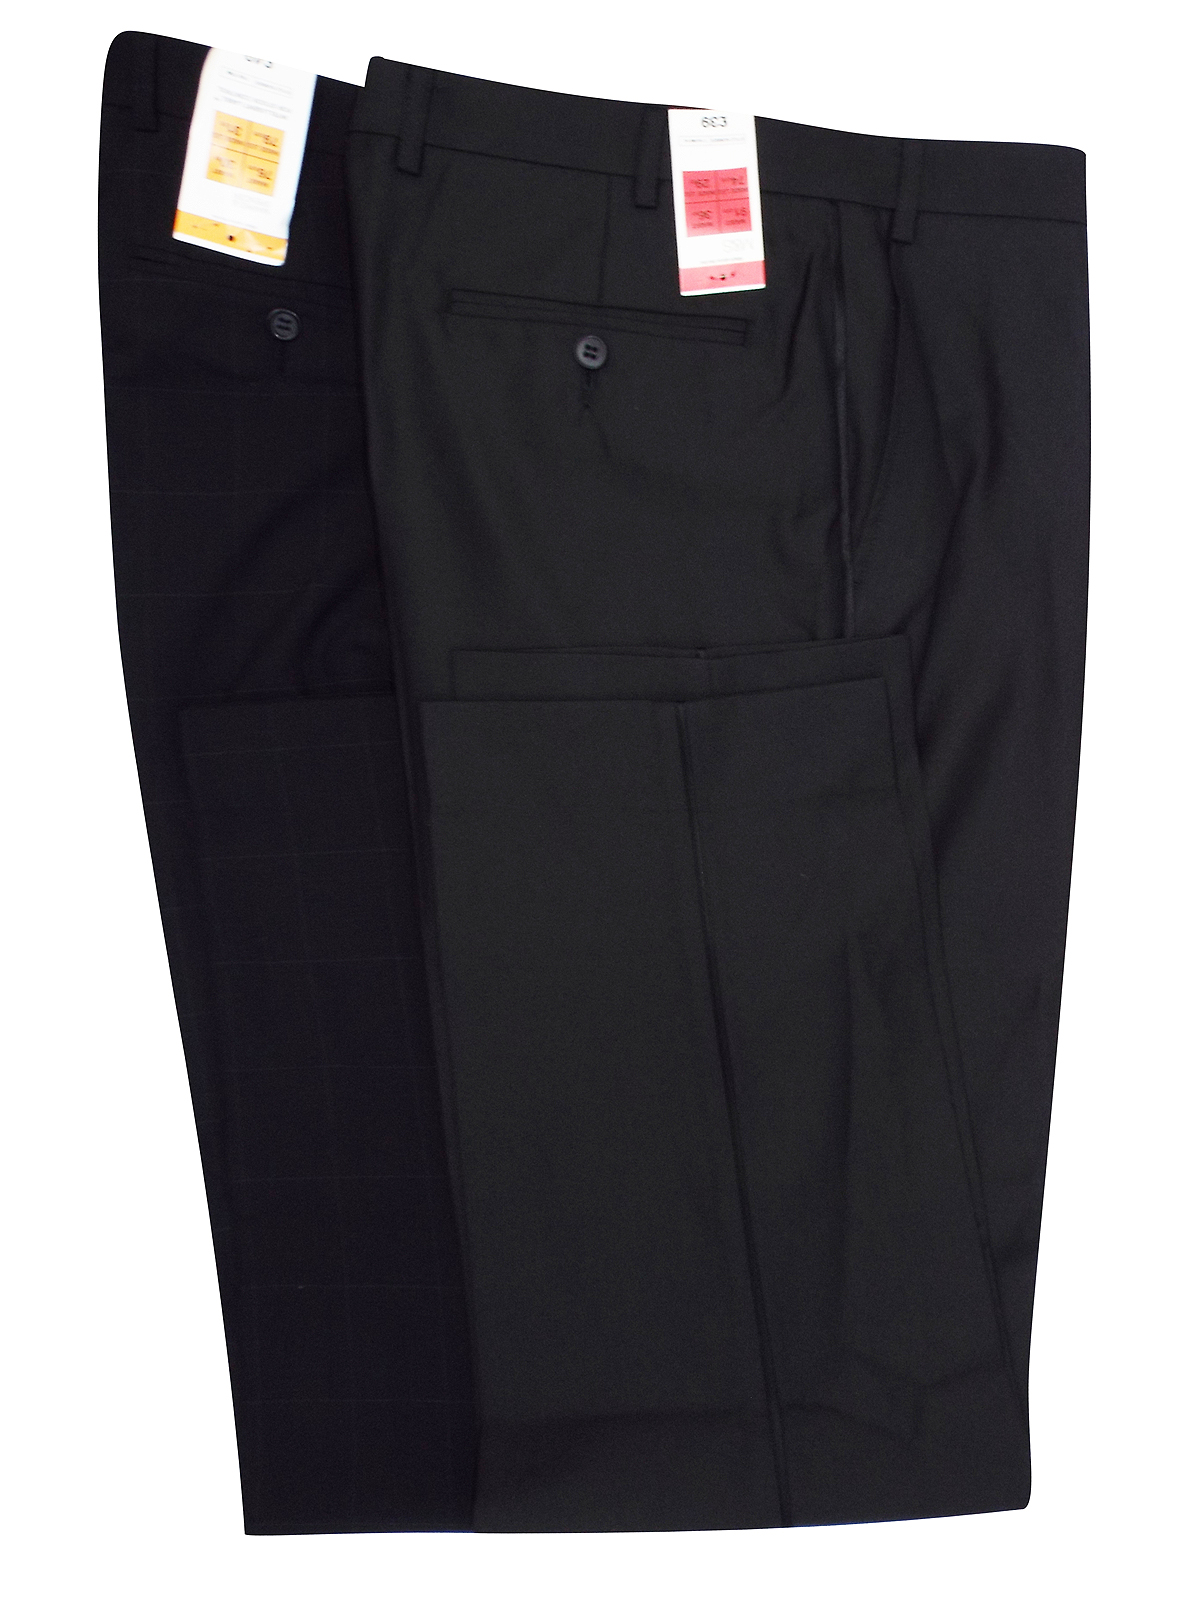 Marks and Spencer - - M&5 ASSORTED Mens Trousers - Waist Size 30 to 46 ...